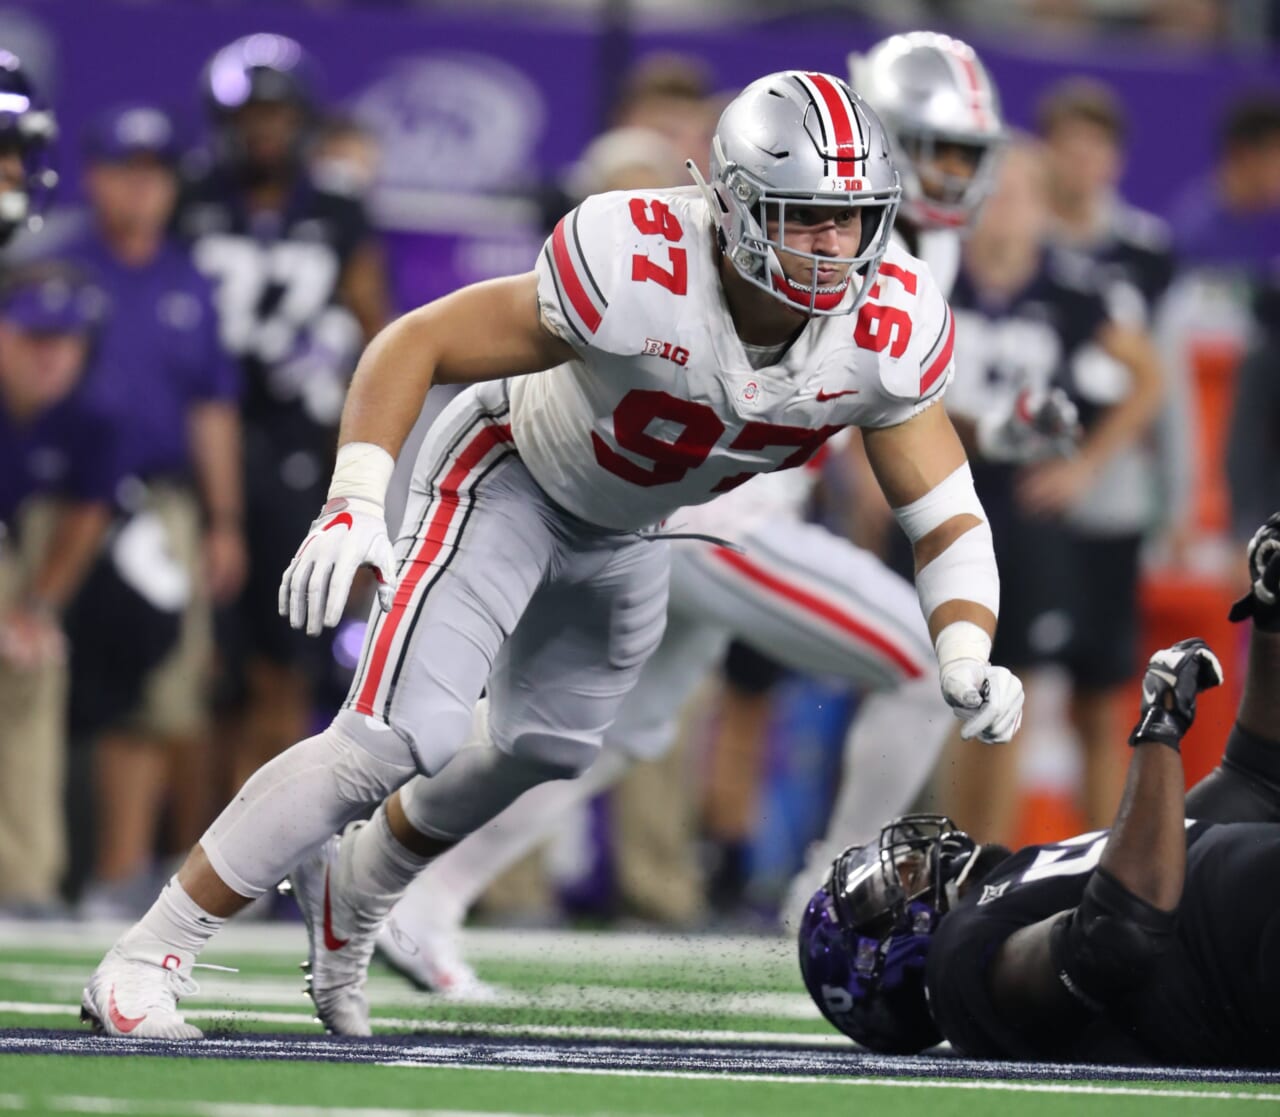 New York Giants: Nick Bosa Would Be Solid Pick, If Available